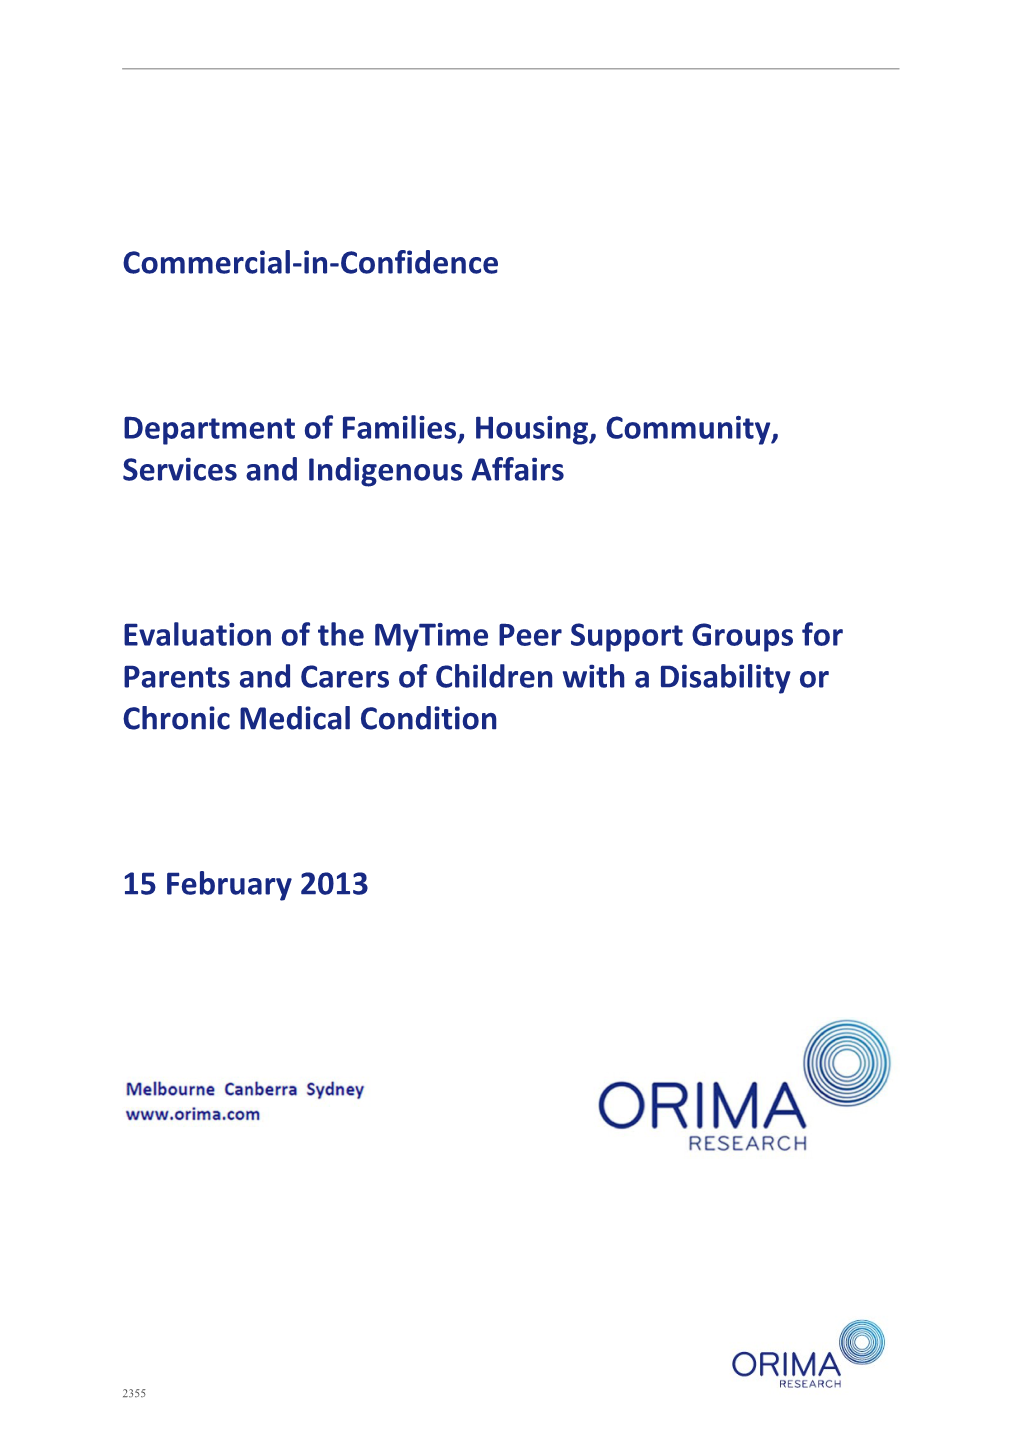 Evaluation of the Mytime Peer Support Groups for Parents and Carers of Children with A